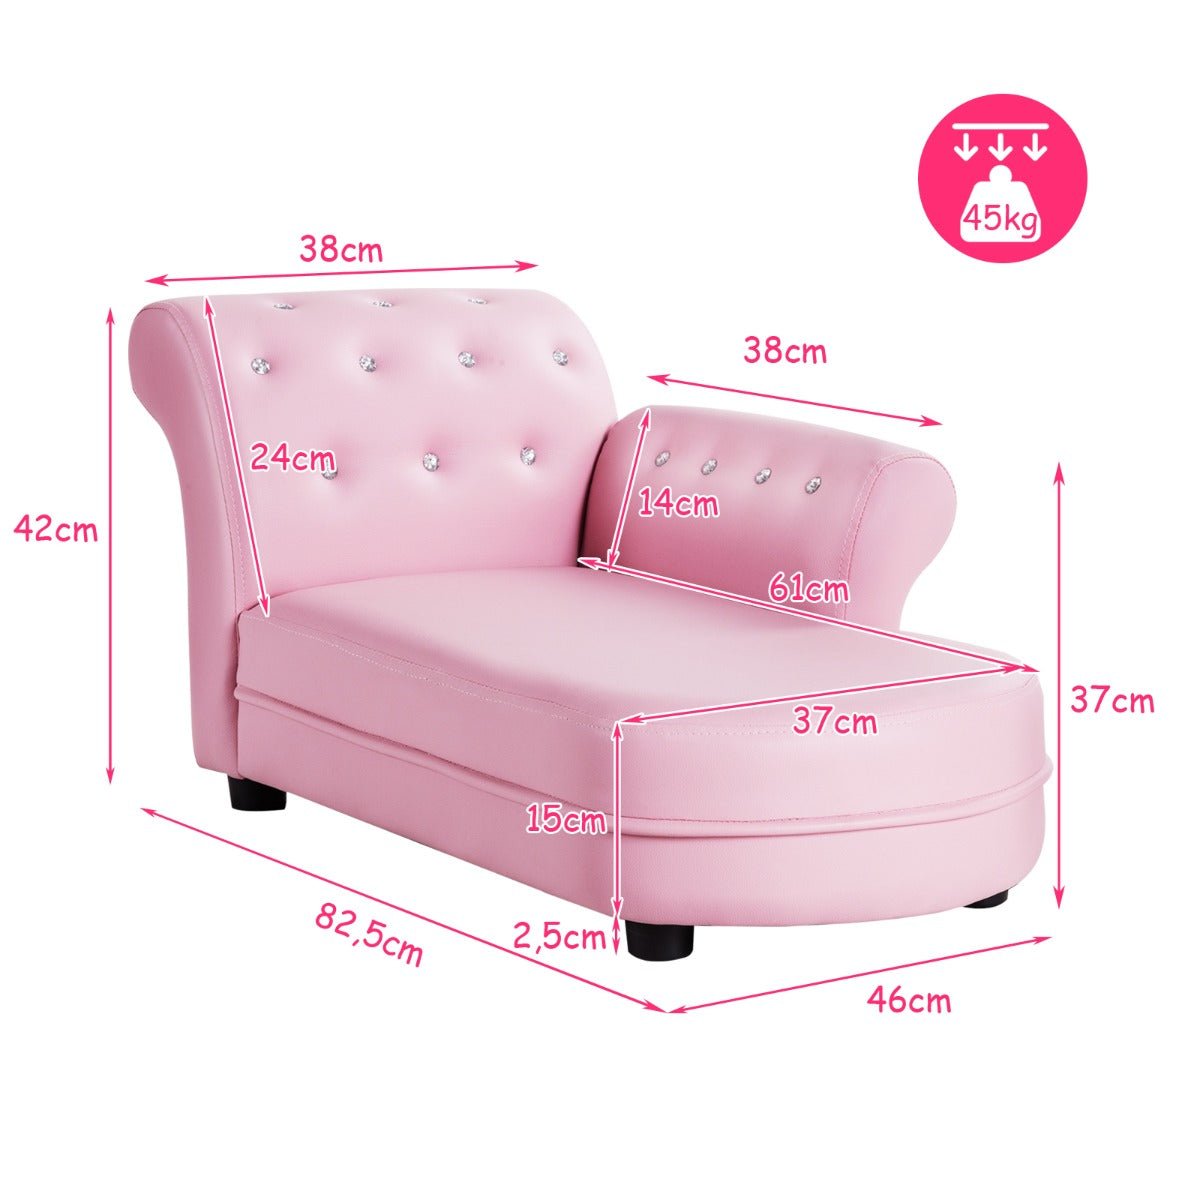 Pink Kids Sofa: PVC Leather and Crystal Embellishments - Divine Relaxation